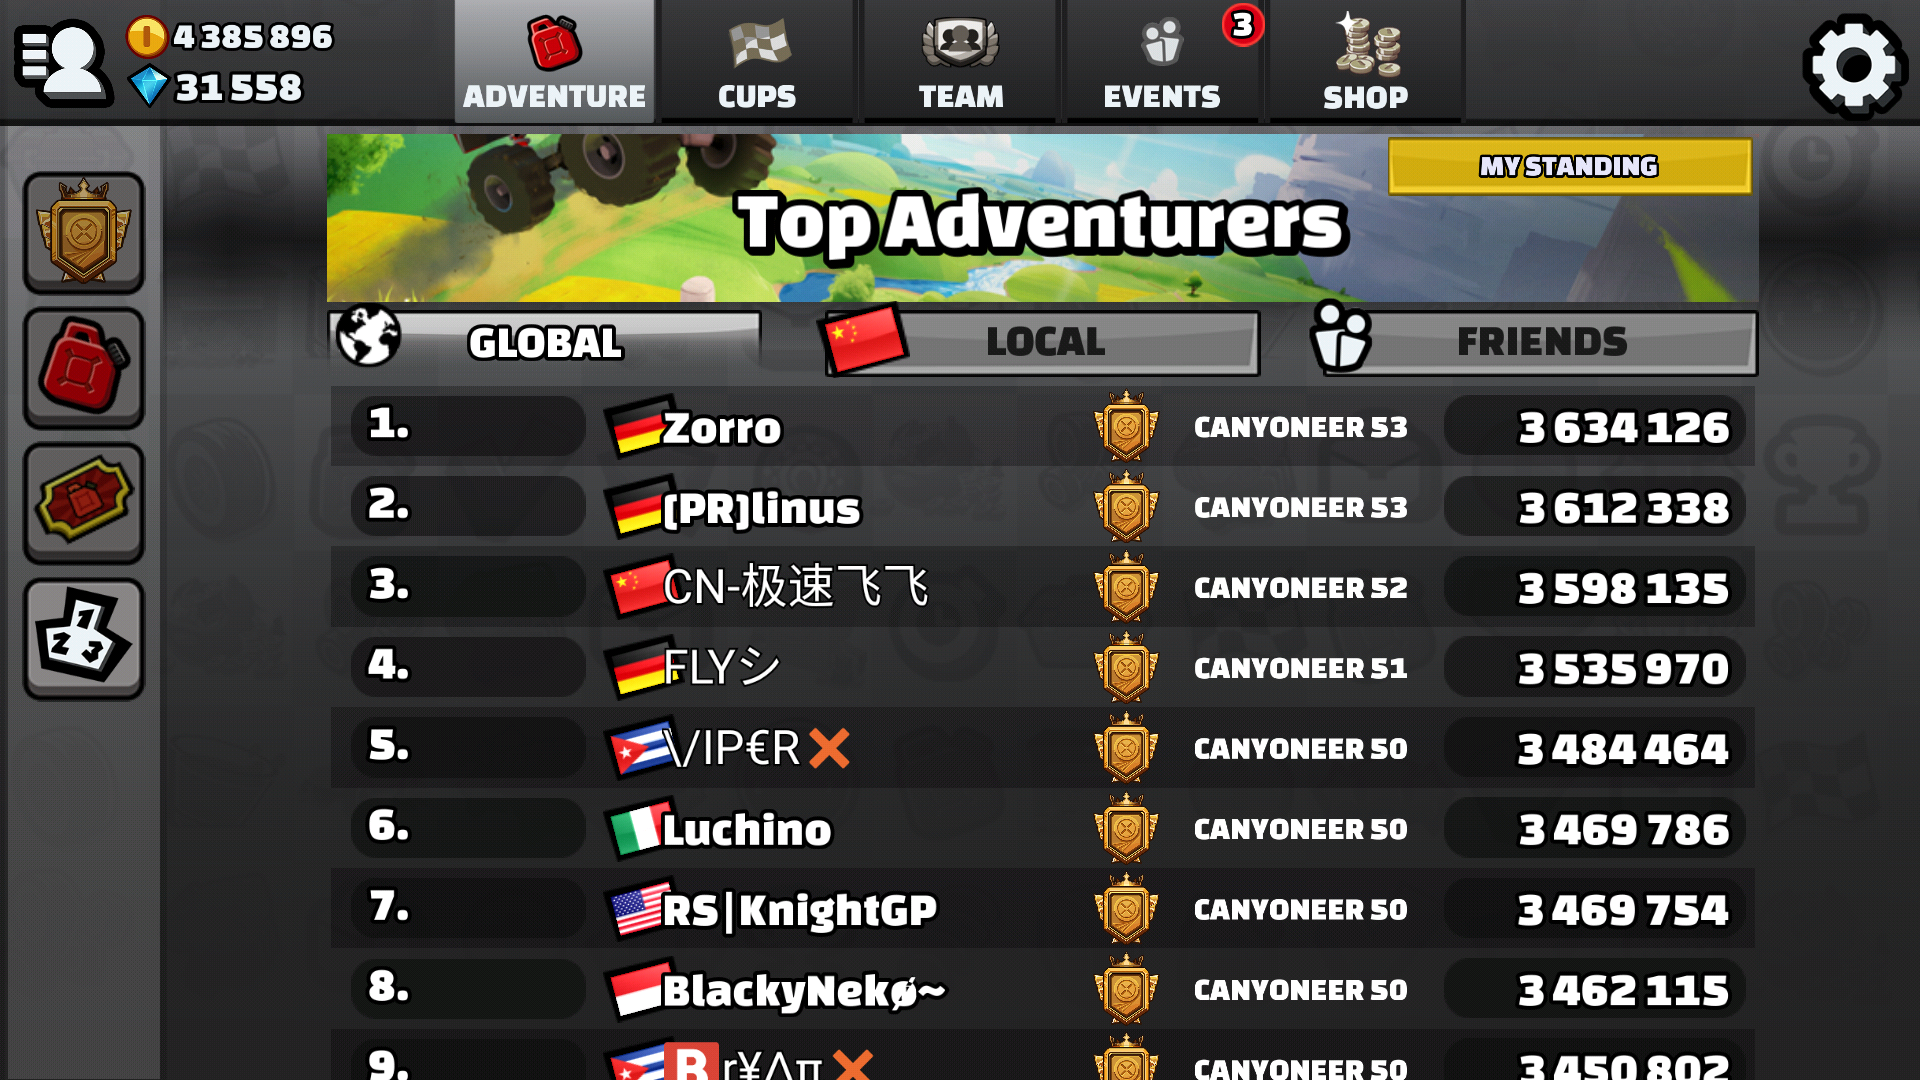 CLIMBING UP THE LEADERBOARDS WITH THIS CONKELDURR TEAM